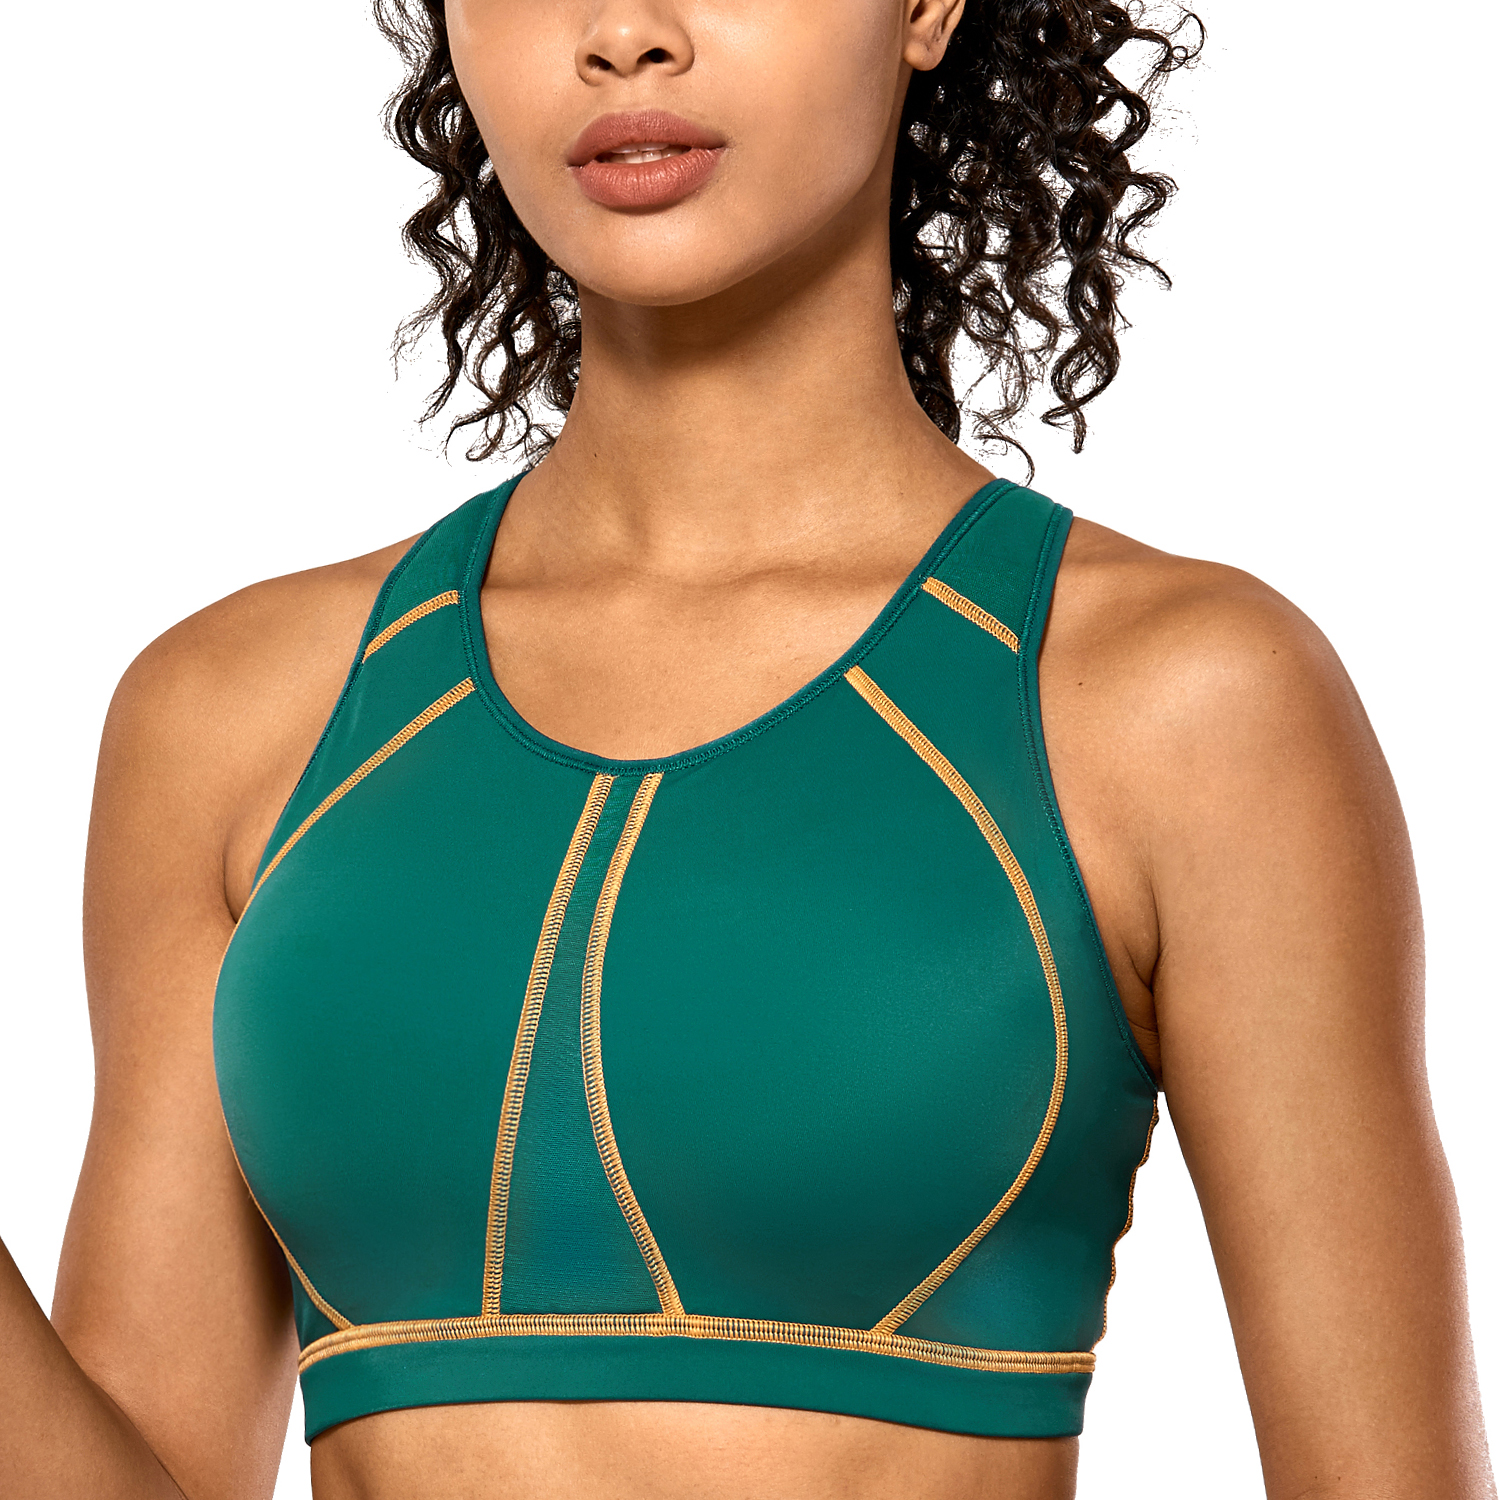 Womens High Impact Sports Bra Full Coverage Support Wirefree Padded Supportive Ebay 